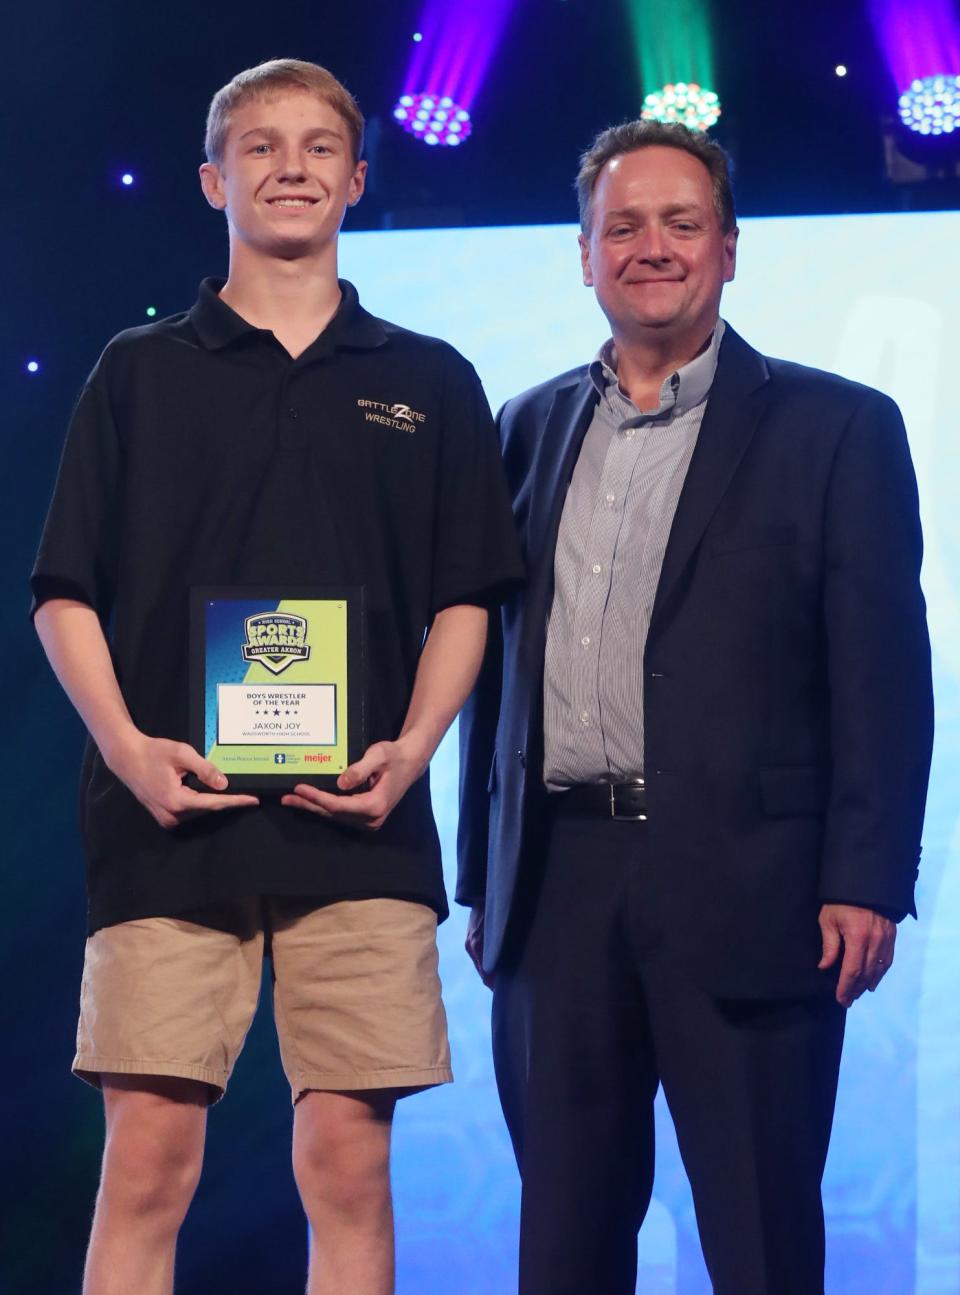 Wadsworth High's Jaxon Joy Greater Akron Wrestling Player of the Year with Michael Shearer Akron Beacon Journal editor at the High School Sports All-Star Awards at the Civic Theatre in Akron on Friday.